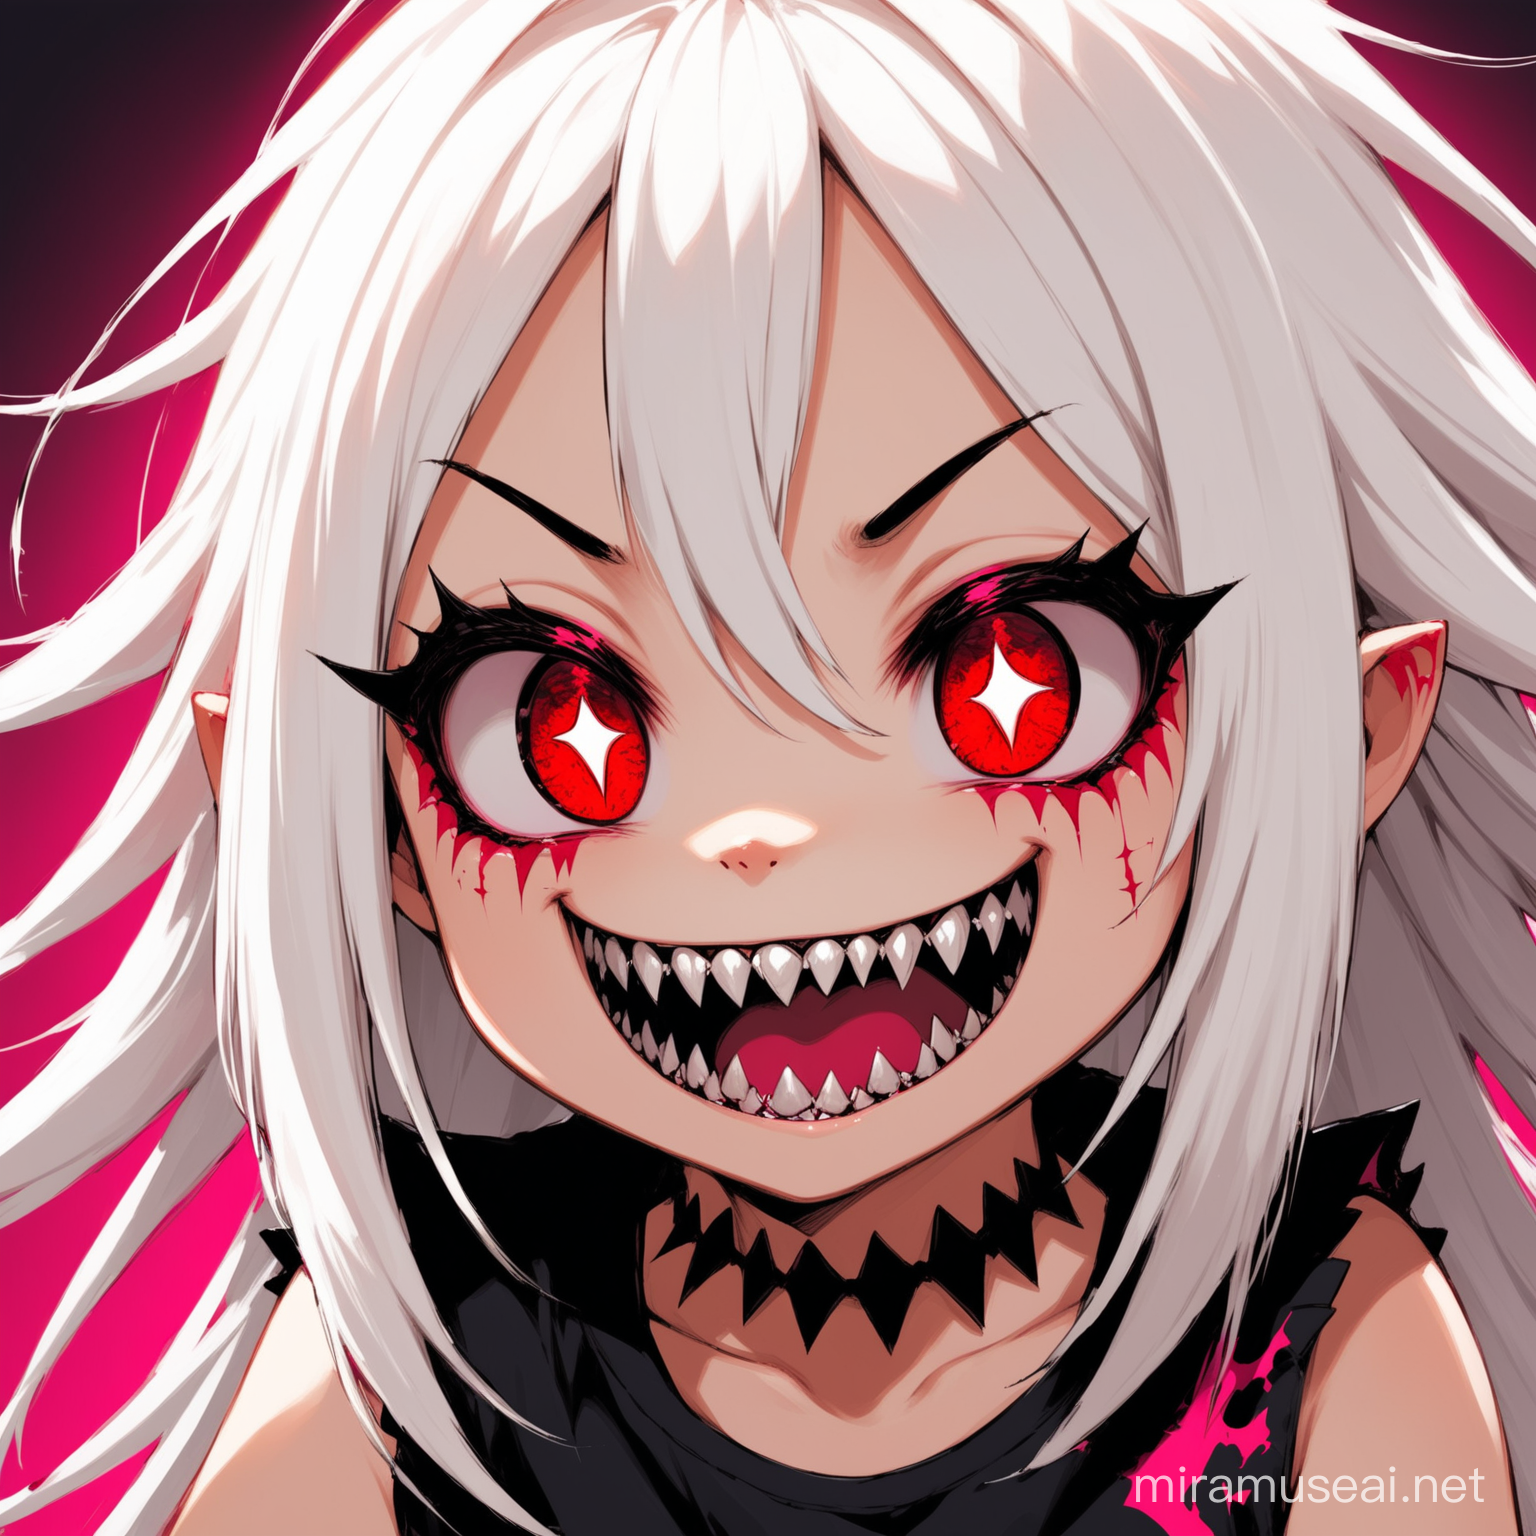 Eccentric Little Girl with Fiery Red Eyes and Sinister Grin